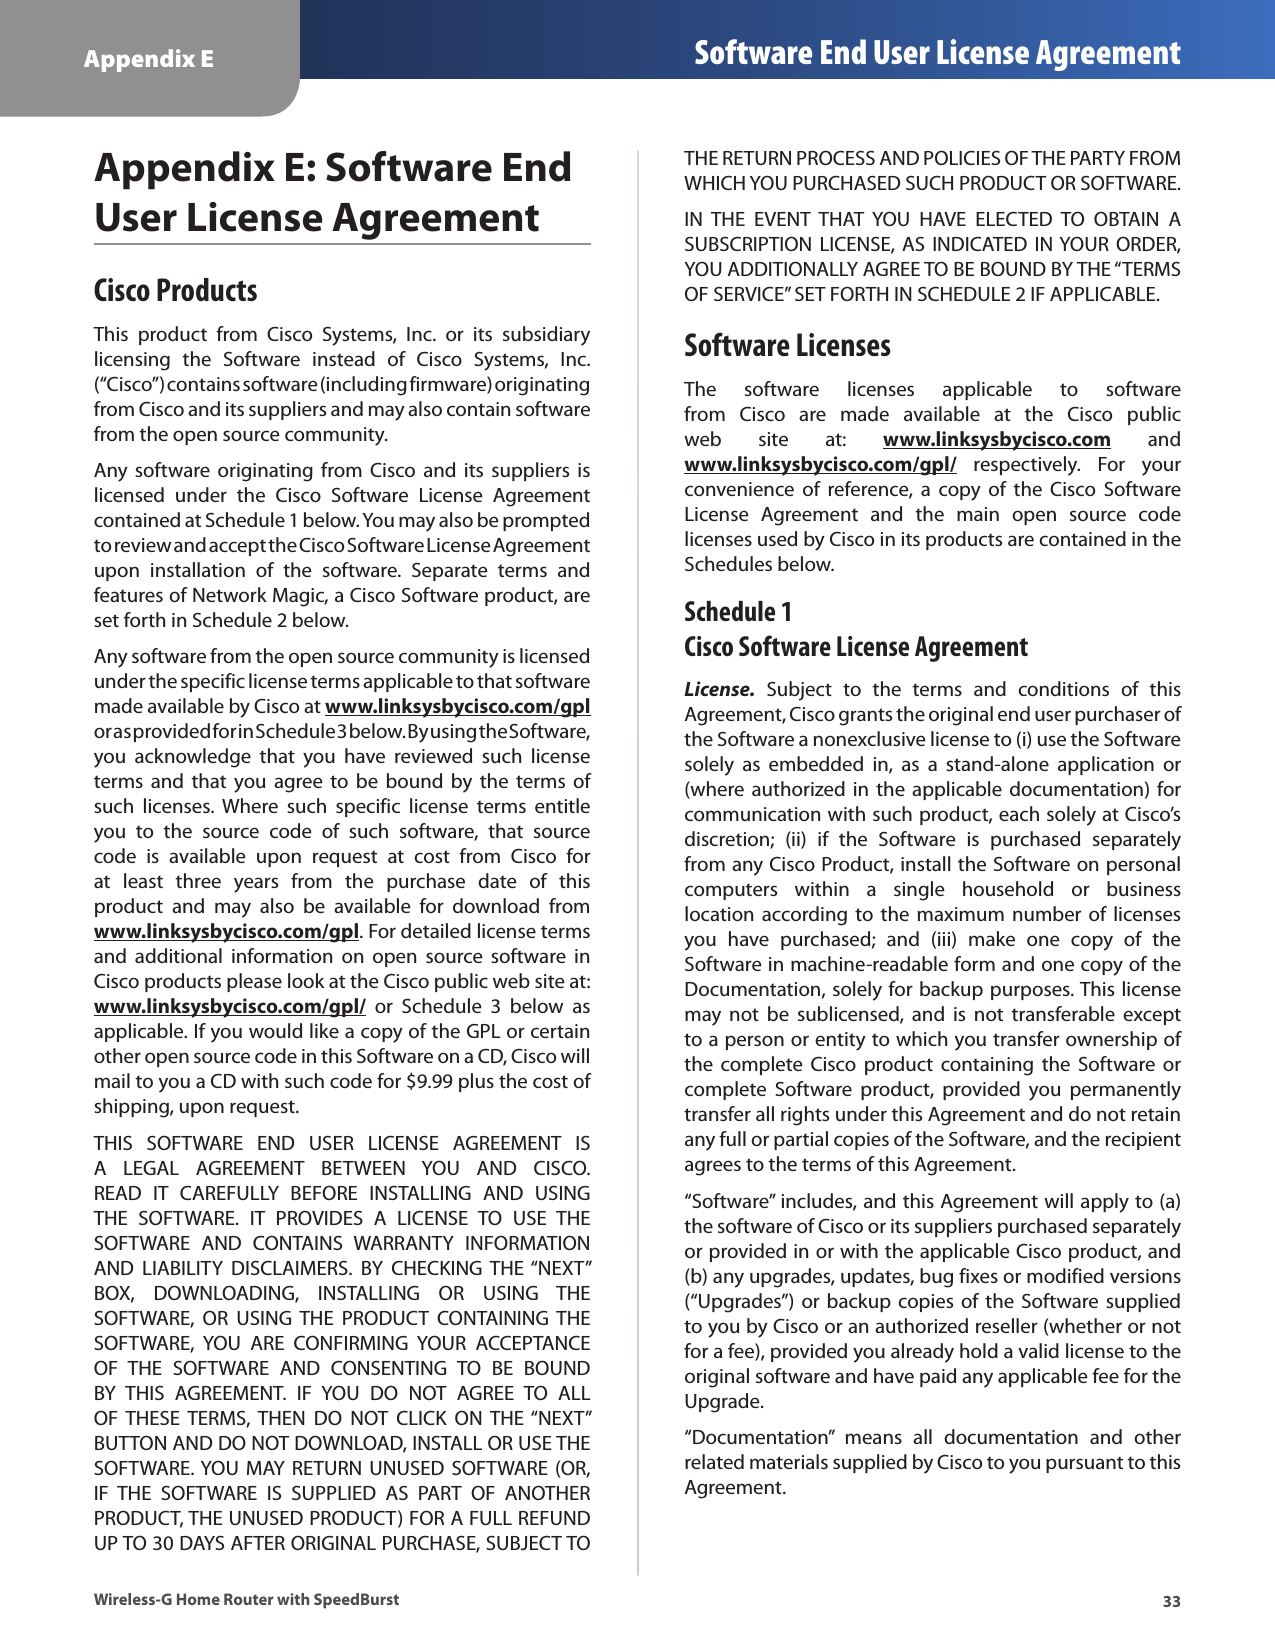 33Appendix E Software End User License AgreementWireless-G Home Router with SpeedBurstAppendix E: Software End User License AgreementCisco ProductsThis  product  from  Cisco  Systems,  Inc.  or  its  subsidiary licensing  the  Software  instead  of  Cisco  Systems,  Inc. (“Cisco”) contains software (including firmware) originating from Cisco and its suppliers and may also contain software from the open source community. Any software  originating from  Cisco and  its  suppliers  is licensed  under  the  Cisco  Software  License  Agreement contained at Schedule 1 below. You may also be prompted to review and accept the Cisco Software License Agreement upon  installation  of  the  software.  Separate  terms  and features of Network Magic, a Cisco Software product, are set forth in Schedule 2 below. Any software from the open source community is licensed under the specific license terms applicable to that software made available by Cisco at www.linksysbycisco.com/gpl or as provided for in Schedule 3 below. By using the Software, you  acknowledge  that  you  have  reviewed  such  license terms  and that  you  agree to  be bound  by the  terms of such  licenses.  Where  such  specific  license  terms  entitle you  to  the  source  code  of  such  software,  that  source code  is  available  upon  request  at  cost  from  Cisco  for at  least  three  years  from  the  purchase  date  of  this product  and  may  also  be  available  for  download  from www.linksysbycisco.com/gpl. For detailed license terms and  additional  information  on  open  source  software  in Cisco products please look at the Cisco public web site at: www.linksysbycisco.com/gpl/  or  Schedule  3  below  as applicable. If you would like a copy of the GPL or certain other open source code in this Software on a CD, Cisco will mail to you a CD with such code for $9.99 plus the cost of shipping, upon request.THIS  SOFTWARE  END  USER  LICENSE  AGREEMENT  IS A  LEGAL  AGREEMENT  BETWEEN  YOU  AND  CISCO. READ  IT  CAREFULLY  BEFORE  INSTALLING  AND  USING THE  SOFTWARE.  IT  PROVIDES  A  LICENSE  TO  USE  THE SOFTWARE  AND  CONTAINS  WARRANTY  INFORMATION AND  LIABILITY  DISCLAIMERS.  BY  CHECKING  THE “NEXT” BOX,  DOWNLOADING,  INSTALLING  OR  USING  THE SOFTWARE,  OR  USING THE  PRODUCT  CONTAINING  THE SOFTWARE,  YOU  ARE  CONFIRMING  YOUR  ACCEPTANCE OF  THE  SOFTWARE  AND  CONSENTING  TO  BE  BOUND BY  THIS  AGREEMENT.  IF  YOU  DO  NOT  AGREE  TO  ALL OF  THESE TERMS,  THEN  DO  NOT  CLICK  ON THE “NEXT” BUTTON AND DO NOT DOWNLOAD, INSTALL OR USE THE SOFTWARE. YOU  MAY  RETURN UNUSED  SOFTWARE (OR, IF  THE  SOFTWARE  IS  SUPPLIED  AS  PART  OF  ANOTHER PRODUCT, THE UNUSED PRODUCT) FOR A FULL REFUND UP TO 30 DAYS AFTER ORIGINAL PURCHASE, SUBJECT TO THE RETURN PROCESS AND POLICIES OF THE PARTY FROM WHICH YOU PURCHASED SUCH PRODUCT OR SOFTWARE.IN  THE  EVENT  THAT  YOU  HAVE  ELECTED  TO  OBTAIN  A SUBSCRIPTION LICENSE,  AS INDICATED  IN YOUR ORDER, YOU ADDITIONALLY AGREE TO BE BOUND BY THE “TERMS OF SERVICE” SET FORTH IN SCHEDULE 2 IF APPLICABLE.Software LicensesThe  software  licenses  applicable  to  software from  Cisco  are  made  available  at  the  Cisco  public web  site  at:  www.linksysbycisco.com  and www.linksysbycisco.com/gpl/  respectively.  For  your convenience  of  reference,  a  copy  of  the  Cisco  Software License  Agreement  and  the  main  open  source  code licenses used by Cisco in its products are contained in the Schedules below.Schedule 1 Cisco Software License AgreementLicense.  Subject  to  the  terms  and  conditions  of  this Agreement, Cisco grants the original end user purchaser of the Software a nonexclusive license to (i) use the Software solely  as  embedded  in,  as  a  stand-alone  application  or (where authorized in  the applicable documentation) for communication with such product, each solely at Cisco’s discretion;  (ii)  if  the  Software  is  purchased  separately from any Cisco Product, install the Software on personal computers  within  a  single  household  or  business location according to  the  maximum number  of licenses you  have  purchased;  and  (iii)  make  one  copy  of  the Software in machine-readable form and one copy of the Documentation, solely for backup purposes. This license may  not  be  sublicensed,  and  is  not  transferable  except to a person or entity to which you transfer ownership of the  complete  Cisco  product  containing  the Software  or complete  Software  product,  provided  you  permanently transfer all rights under this Agreement and do not retain any full or partial copies of the Software, and the recipient agrees to the terms of this Agreement. “Software” includes, and this Agreement will apply to (a) the software of Cisco or its suppliers purchased separately or provided in or with the applicable Cisco product, and (b) any upgrades, updates, bug fixes or modified versions (“Upgrades”)  or  backup copies of the Software supplied to you by Cisco or an authorized reseller (whether or not for a fee), provided you already hold a valid license to the original software and have paid any applicable fee for the Upgrade. “Documentation”  means  all  documentation  and  other related materials supplied by Cisco to you pursuant to this Agreement.